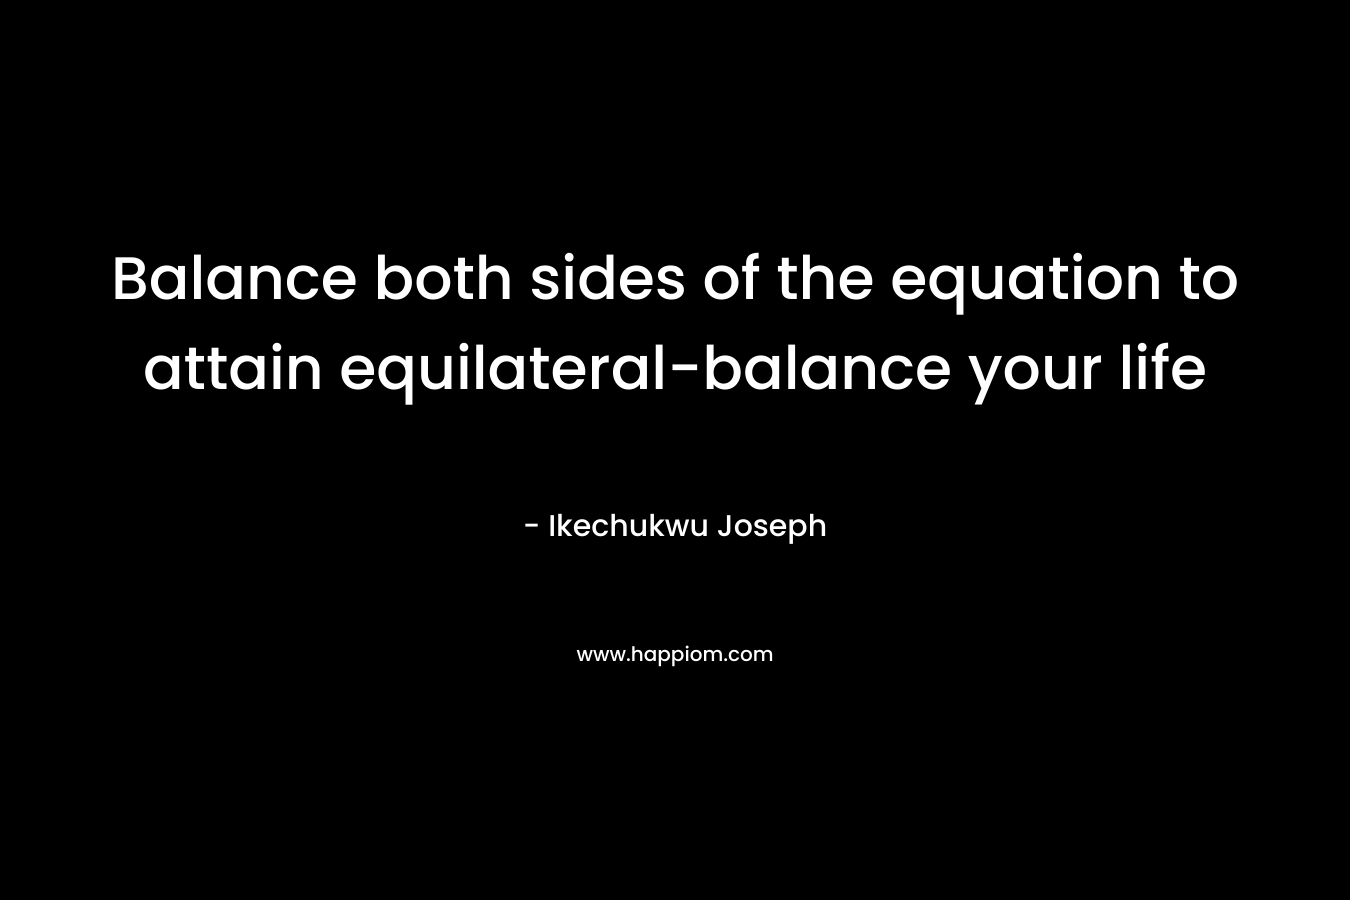 Balance both sides of the equation to attain equilateral-balance your life